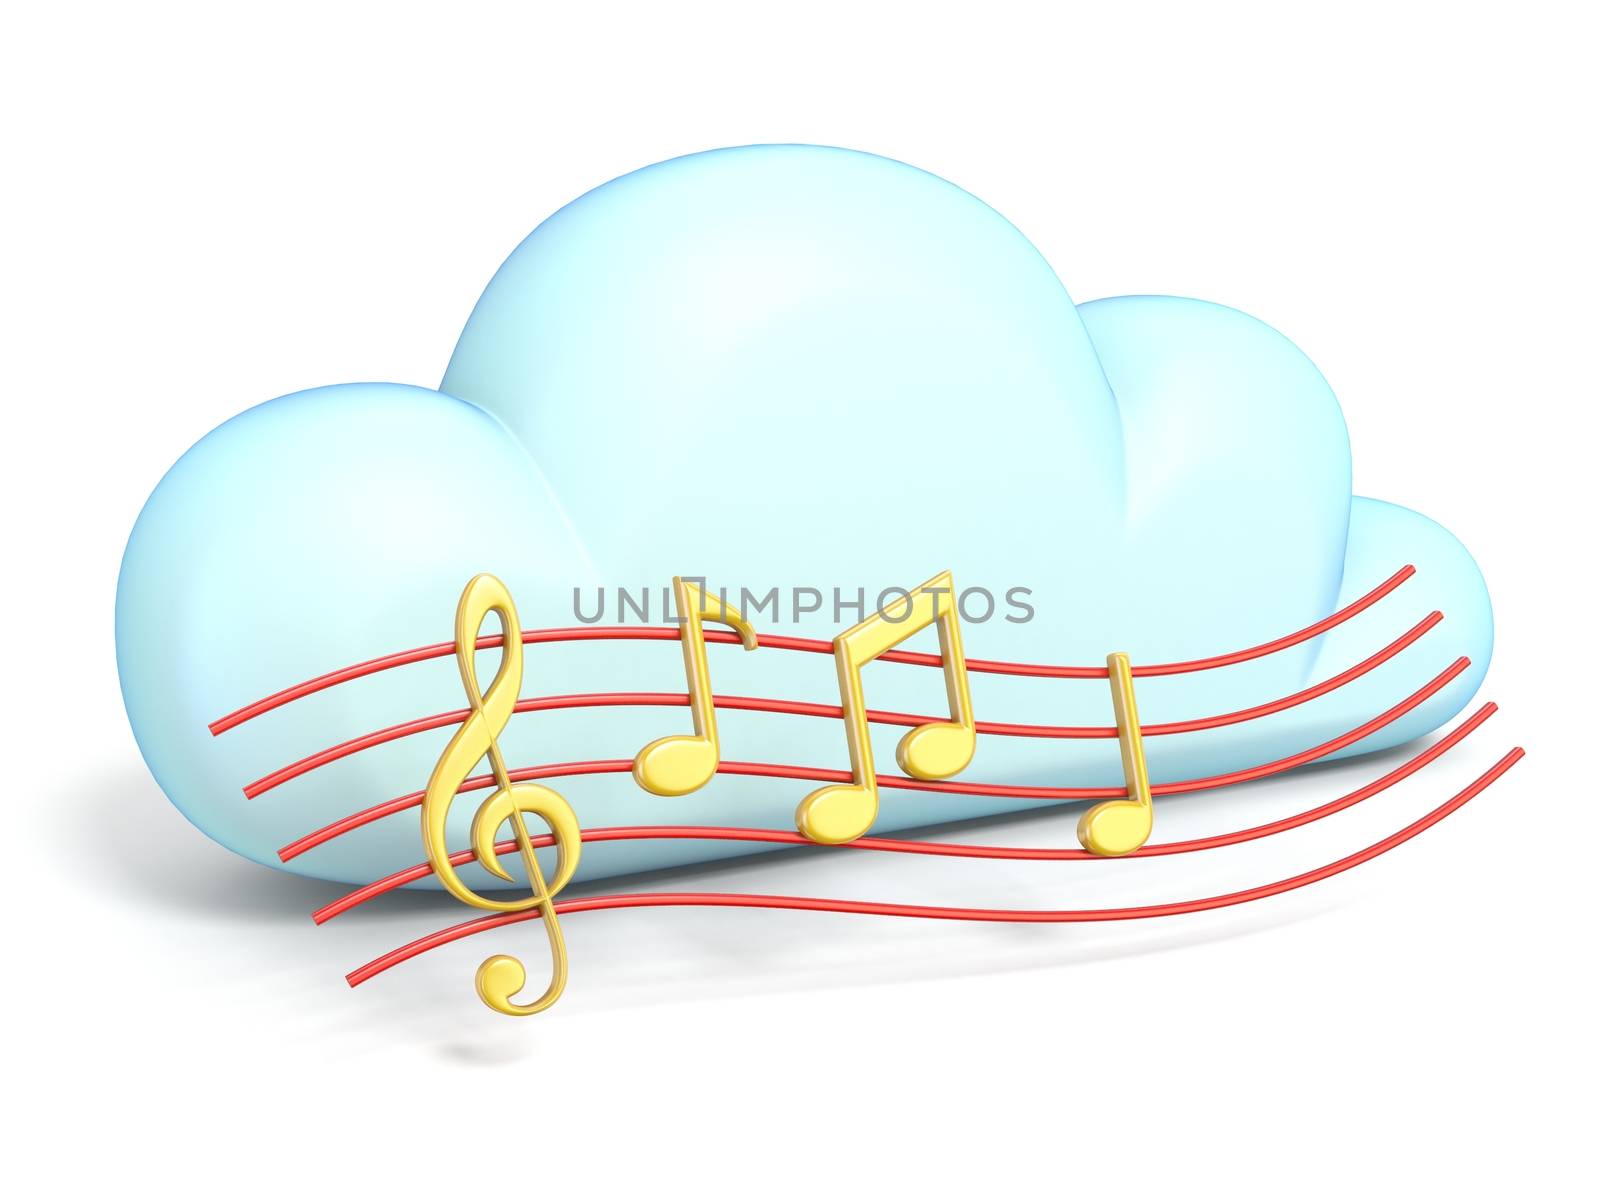 Cloud icon with music notes 3D rendering isolated on white background